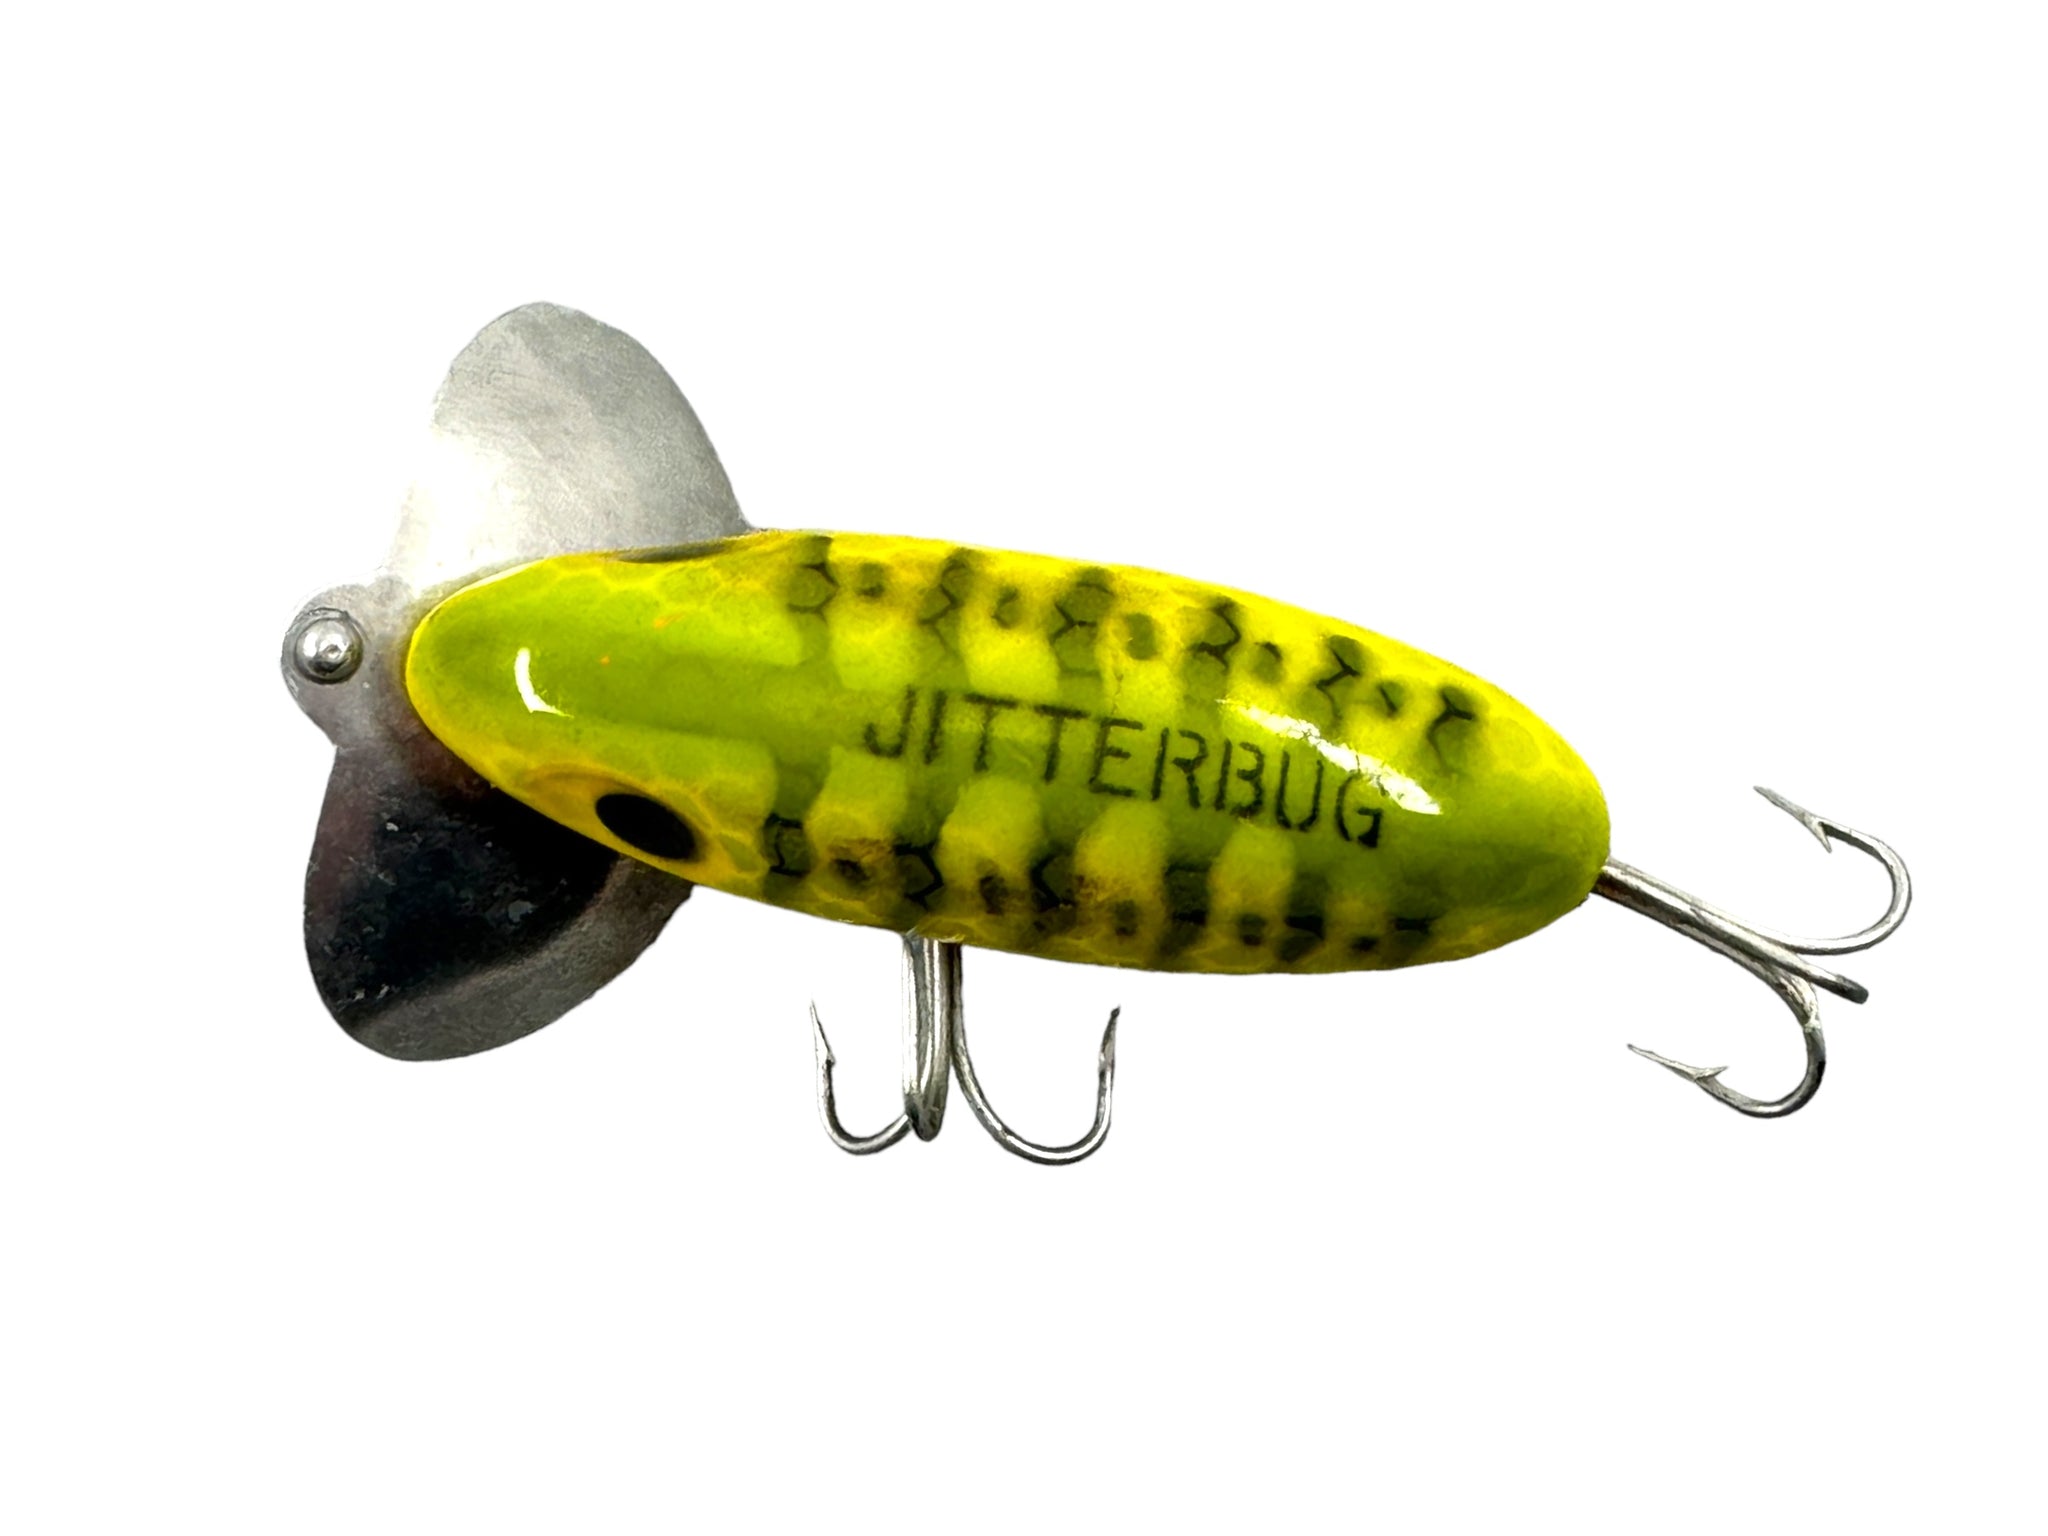 Vintage Jitterbug Fred Arbogast Top Water Fishing Lure